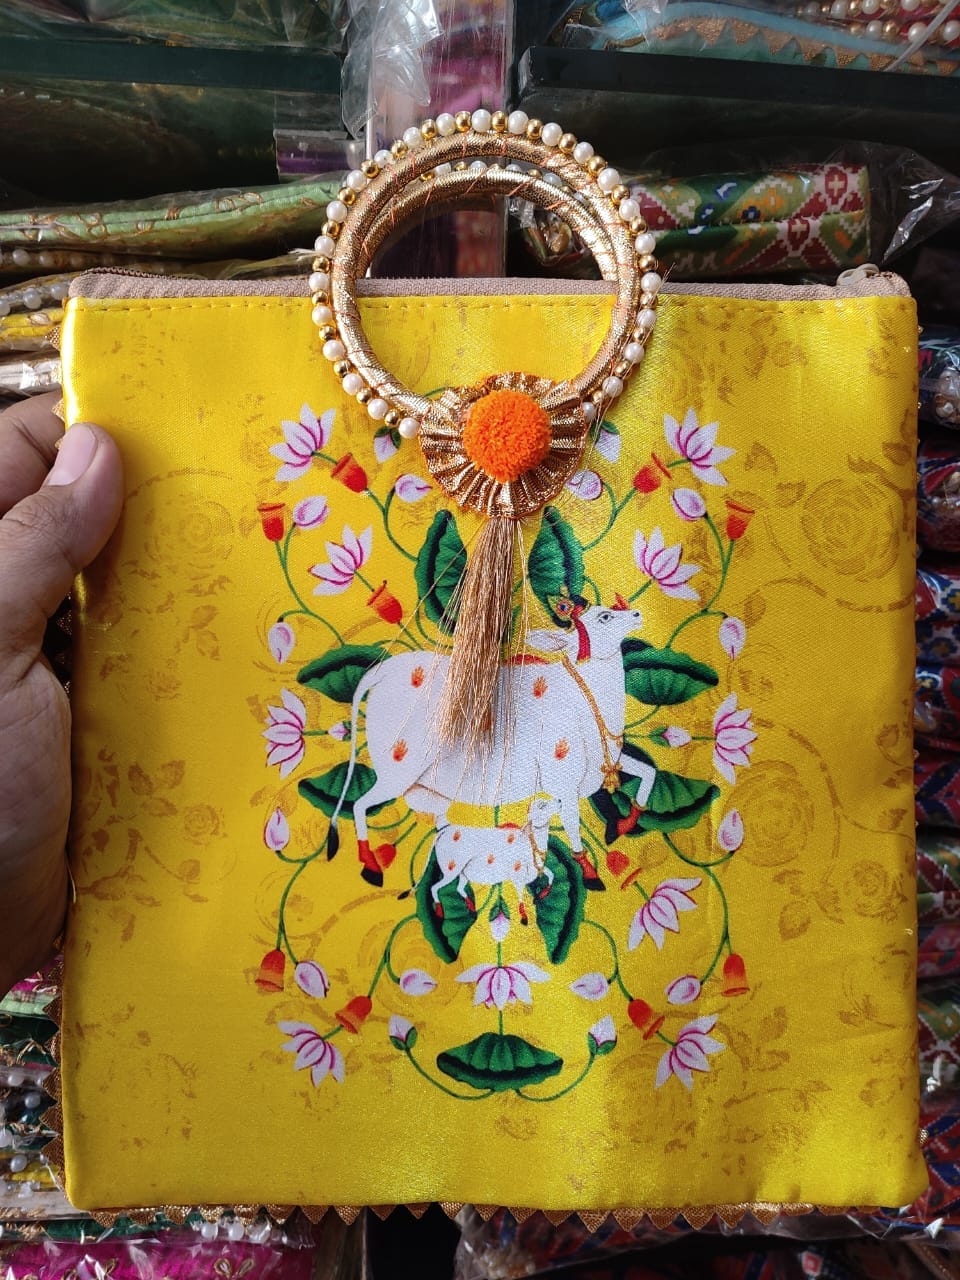 90 Rs each on Purchasing 100+ pcs gift hand bag LAMANSH® Single side Pichwai Print Return Gifts 🎁 bags with gota chudi handle | Floral Print Hand Bags for Return Gifting in Puja & Wedding